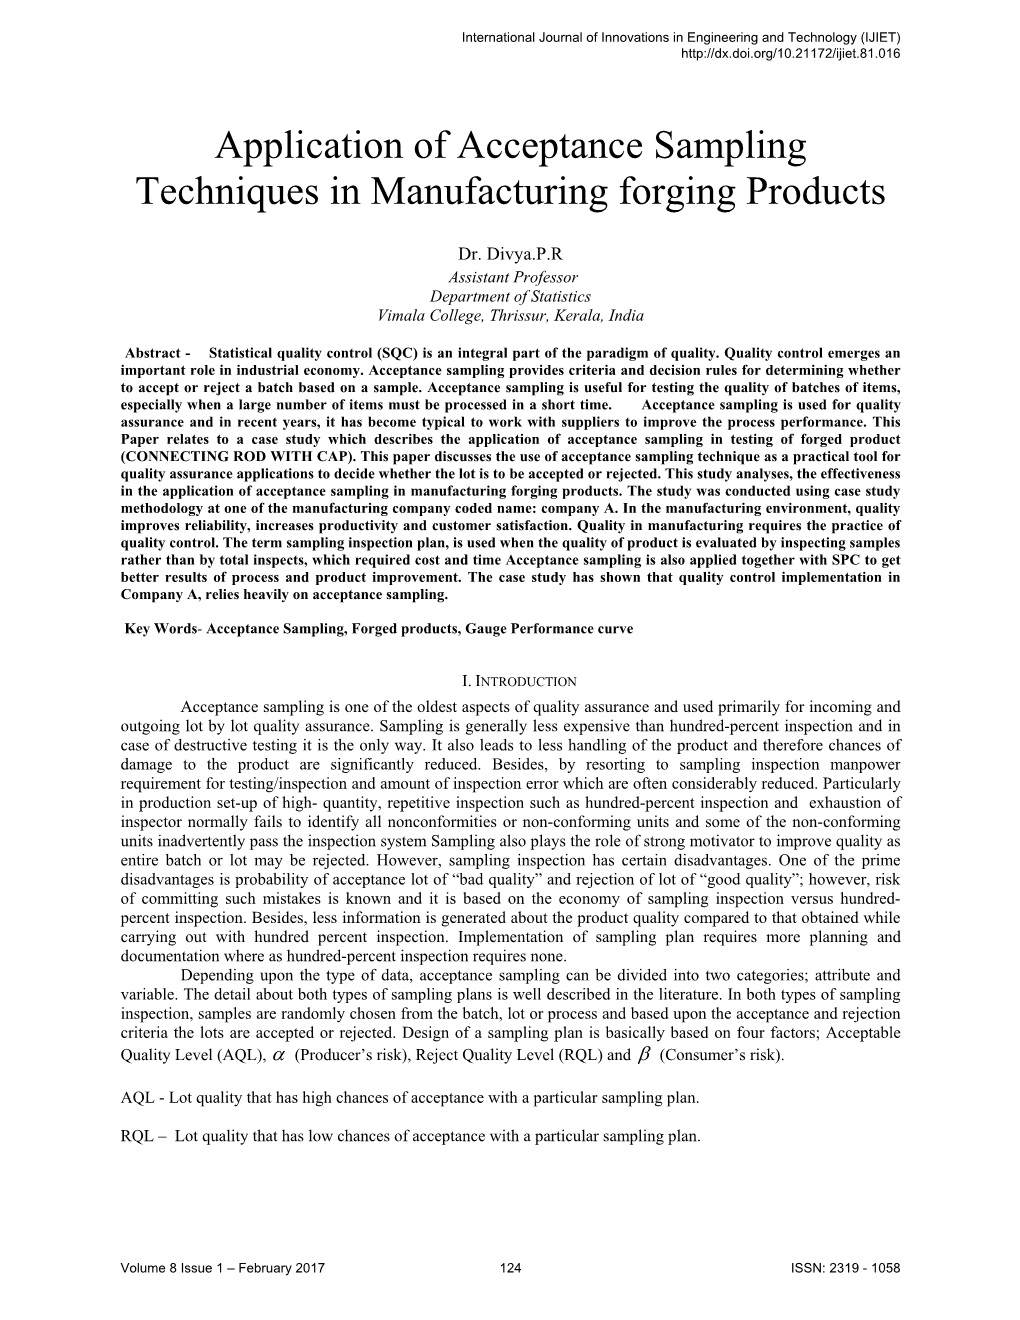 Application of Acceptance Sampling Techniques in Manufacturing Forging Products